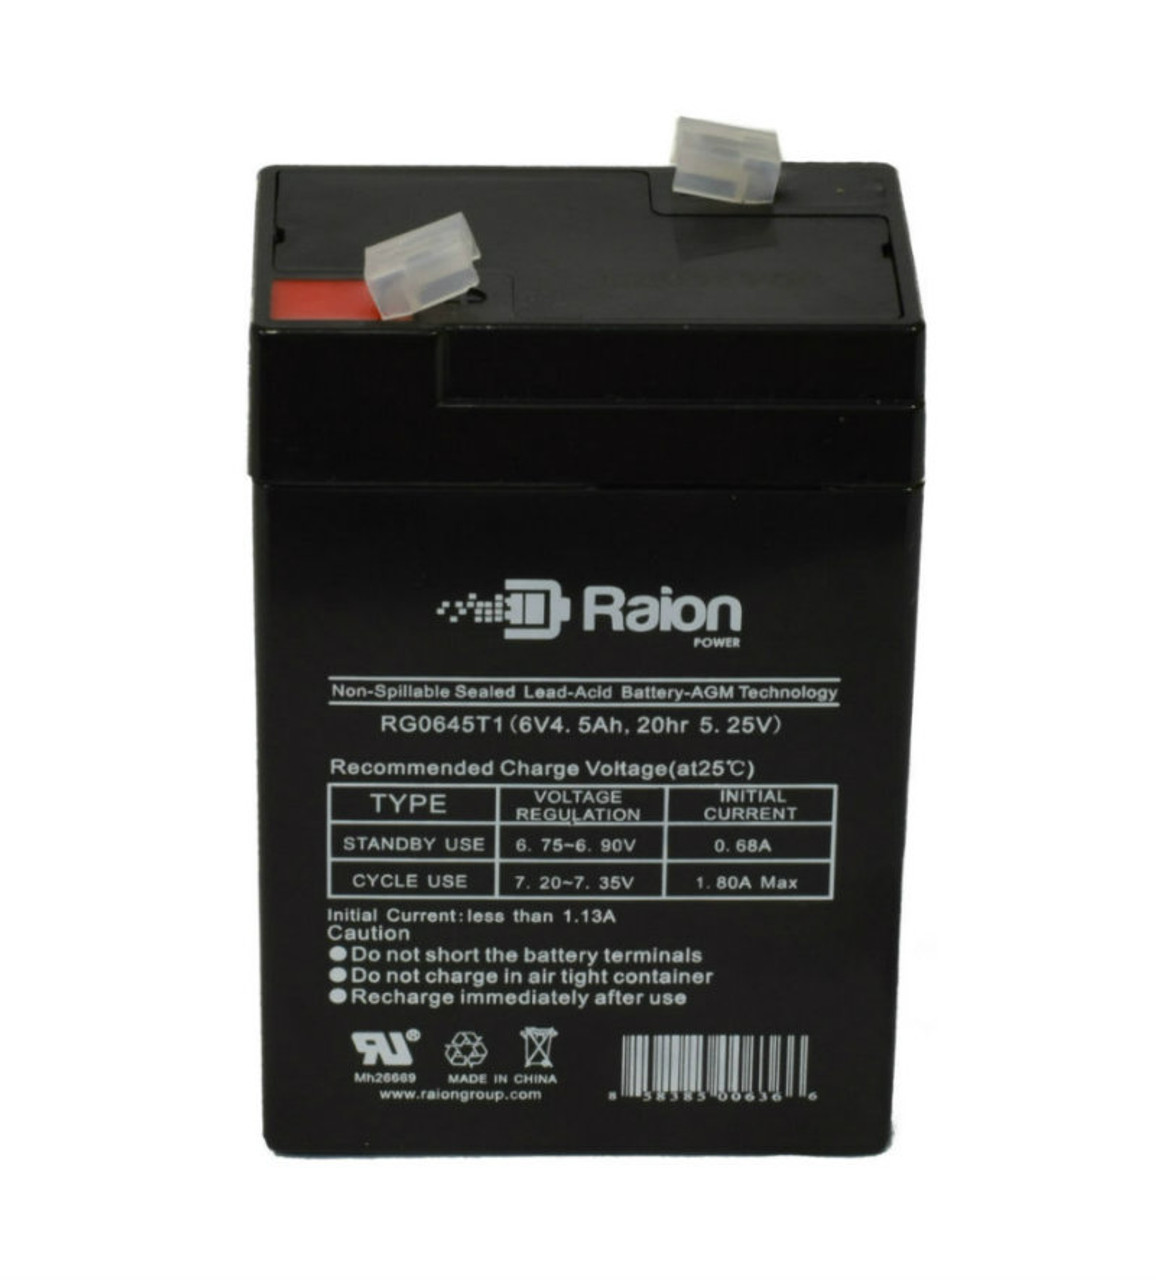 Raion Power RG0645T1 Replacement Battery Cartridge for Light Alarms 660.0004